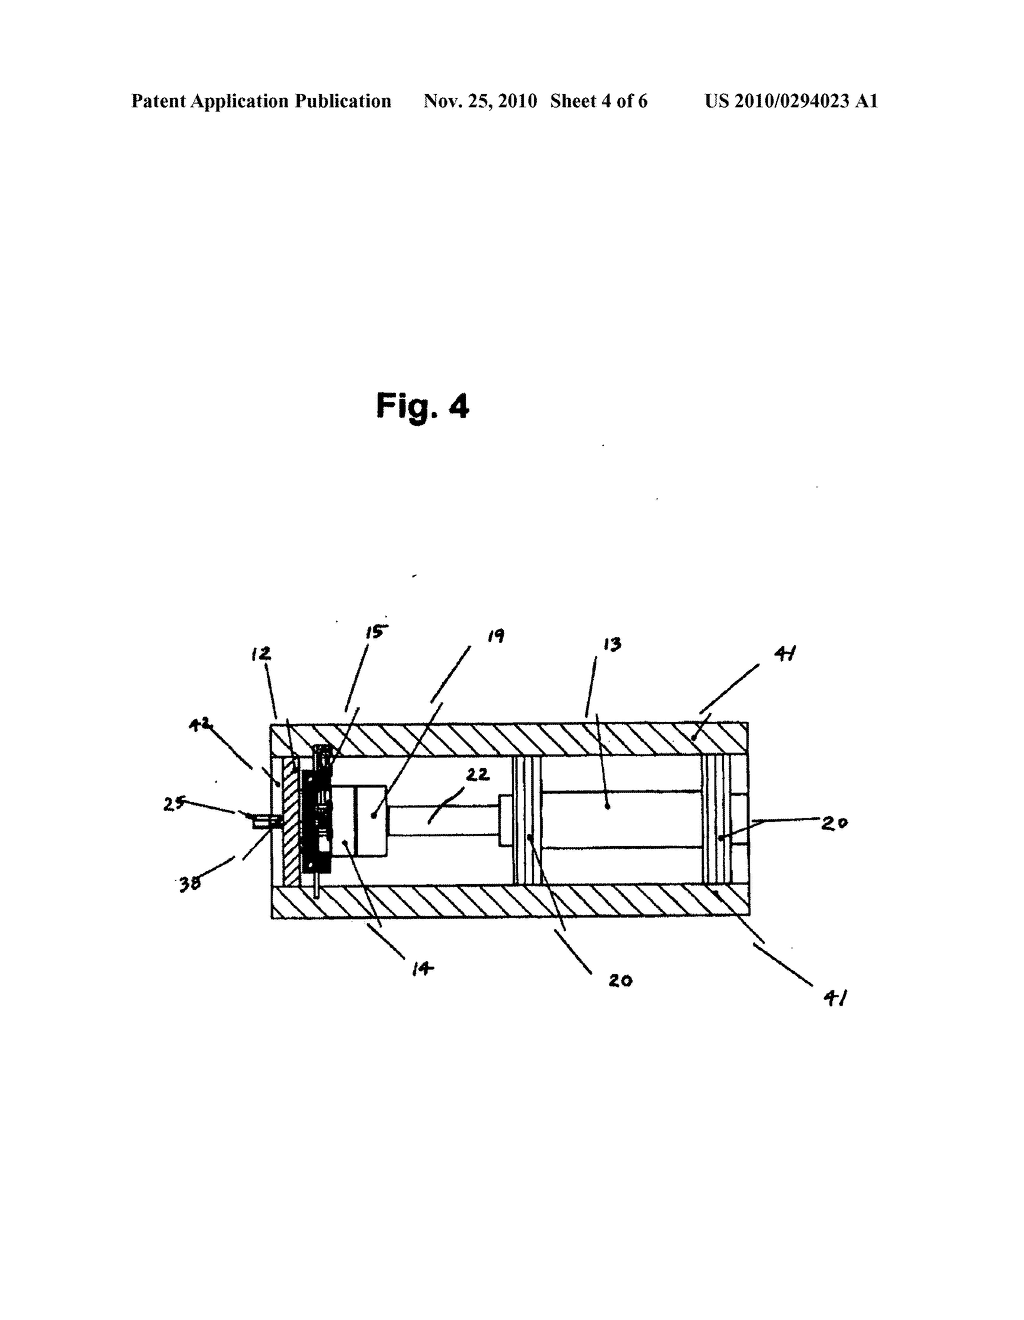 Propellant Ignition Testing Apparatus Having a Compressively Sealable Chamber - diagram, schematic, and image 05